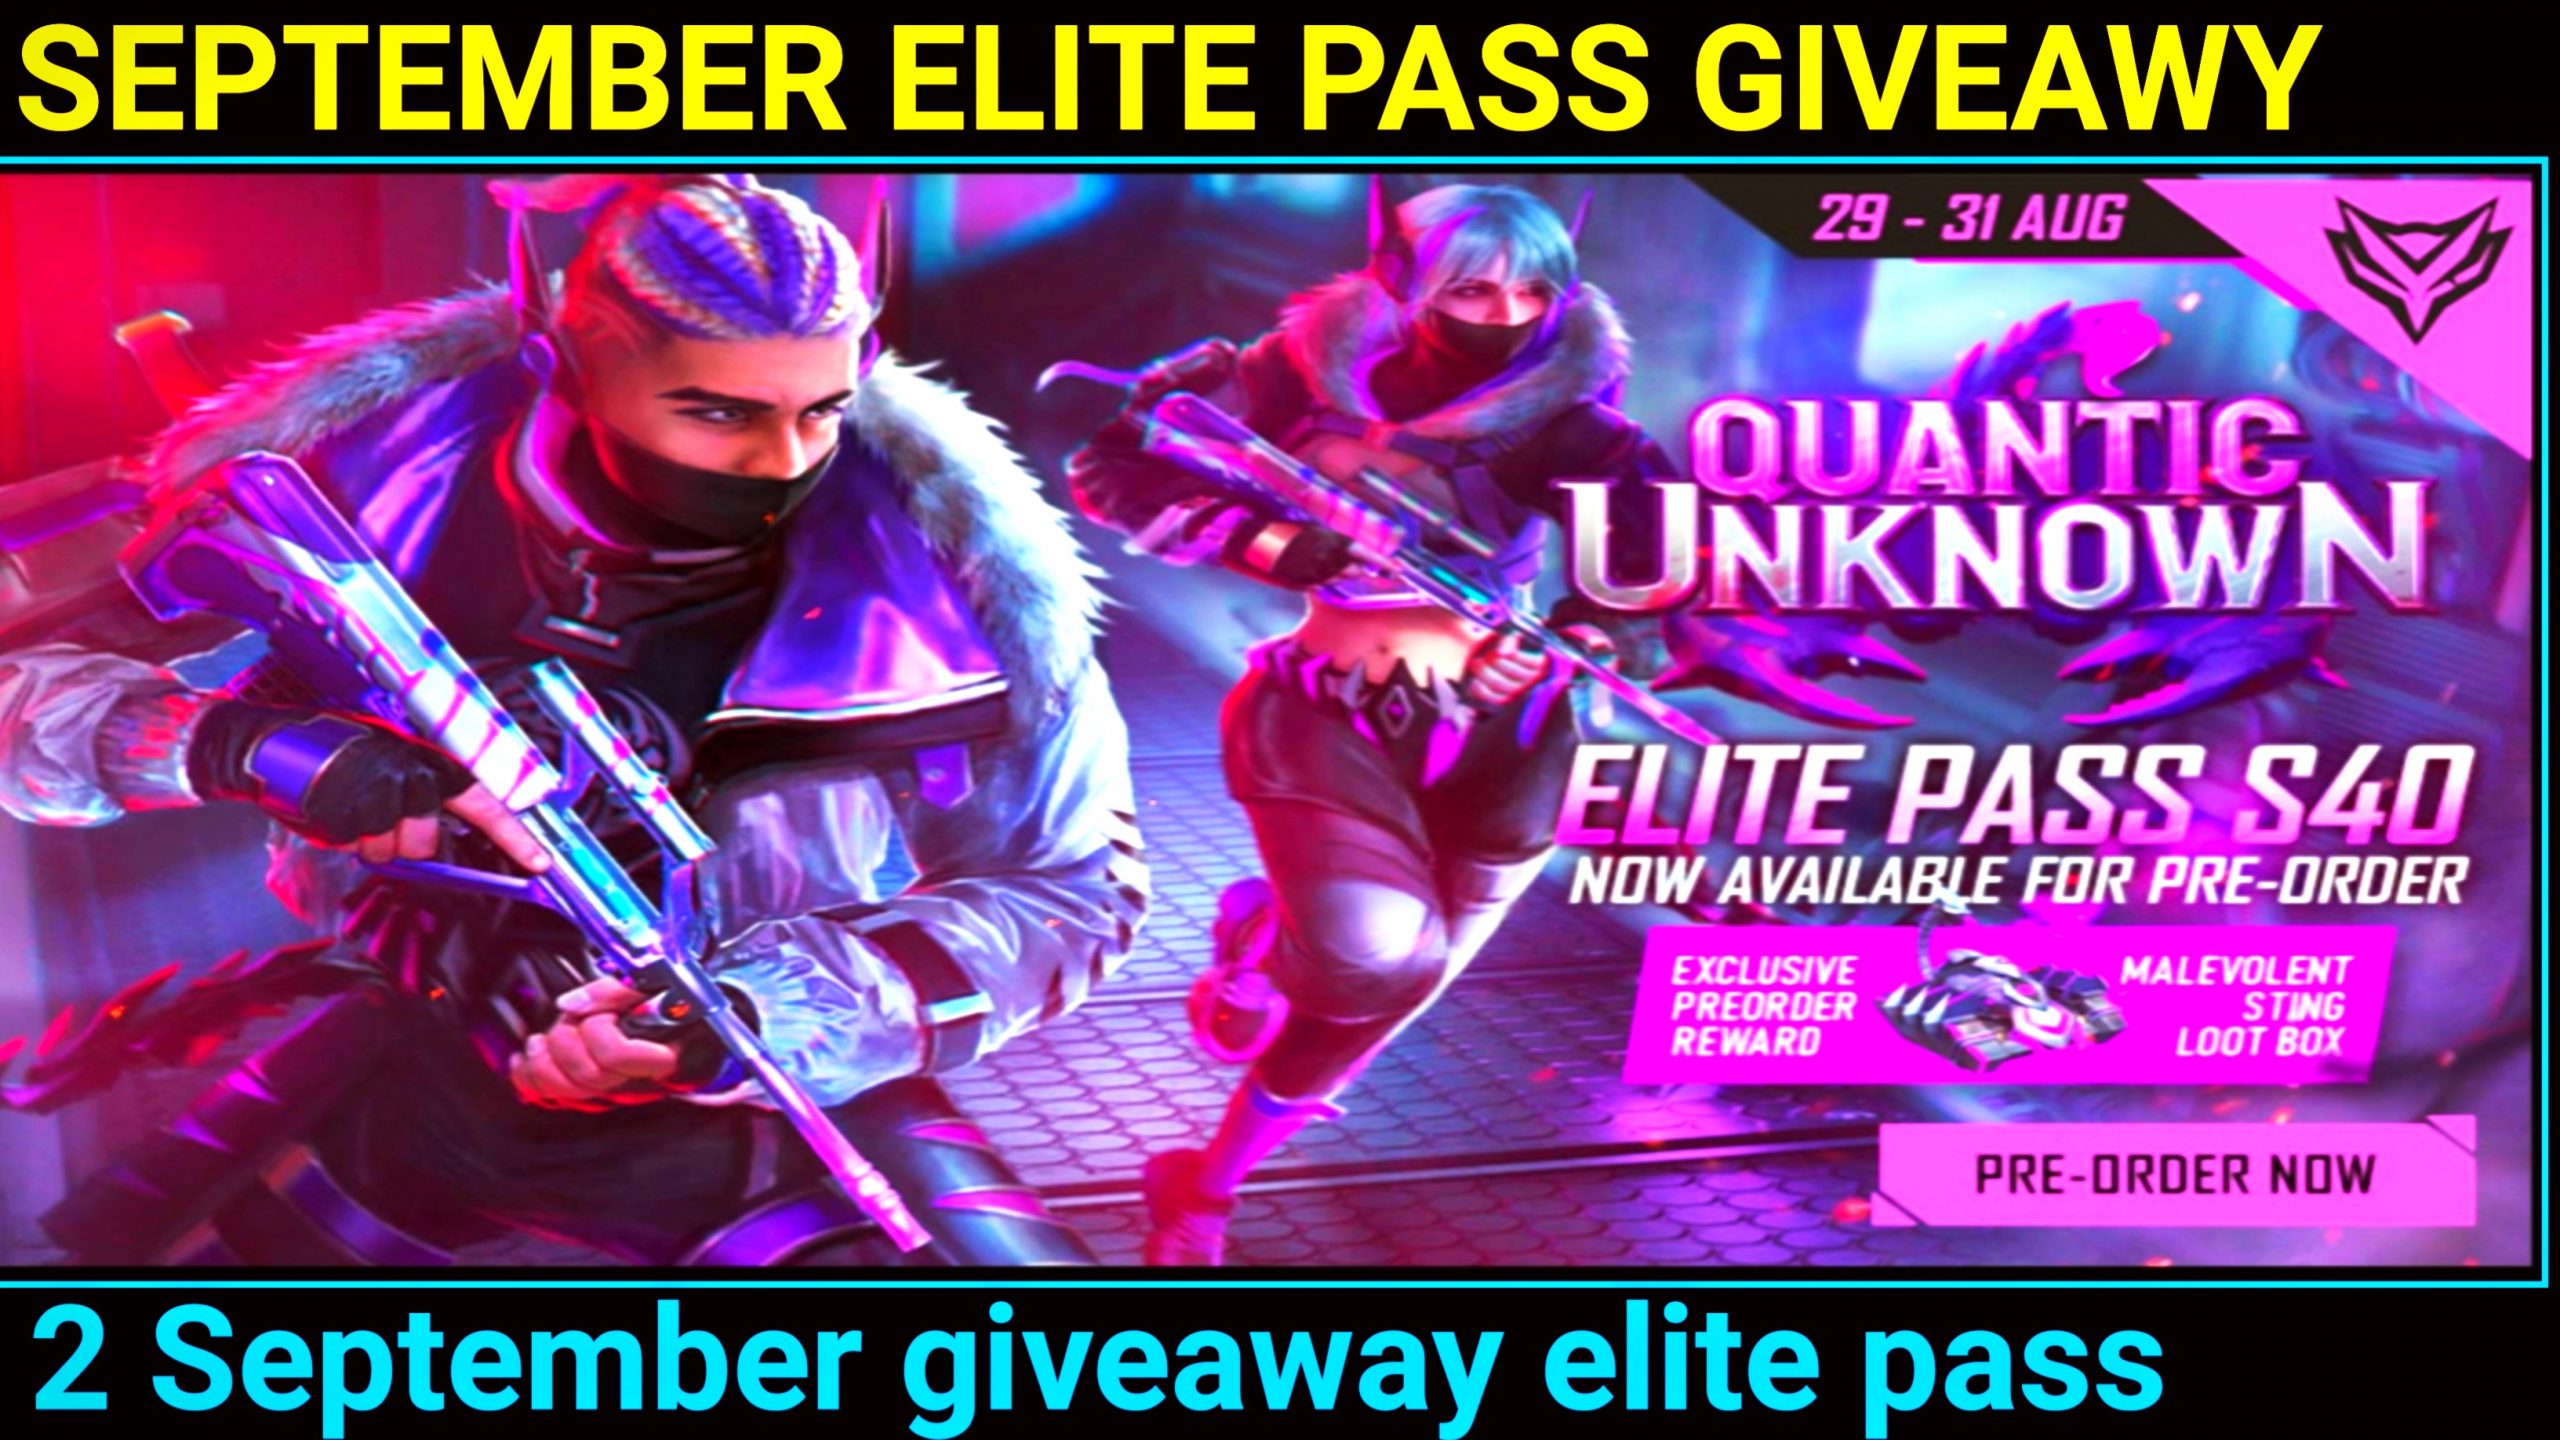 SEPTEMBER ELITE PASS FREE FIRE 2021 GIVEAWAY